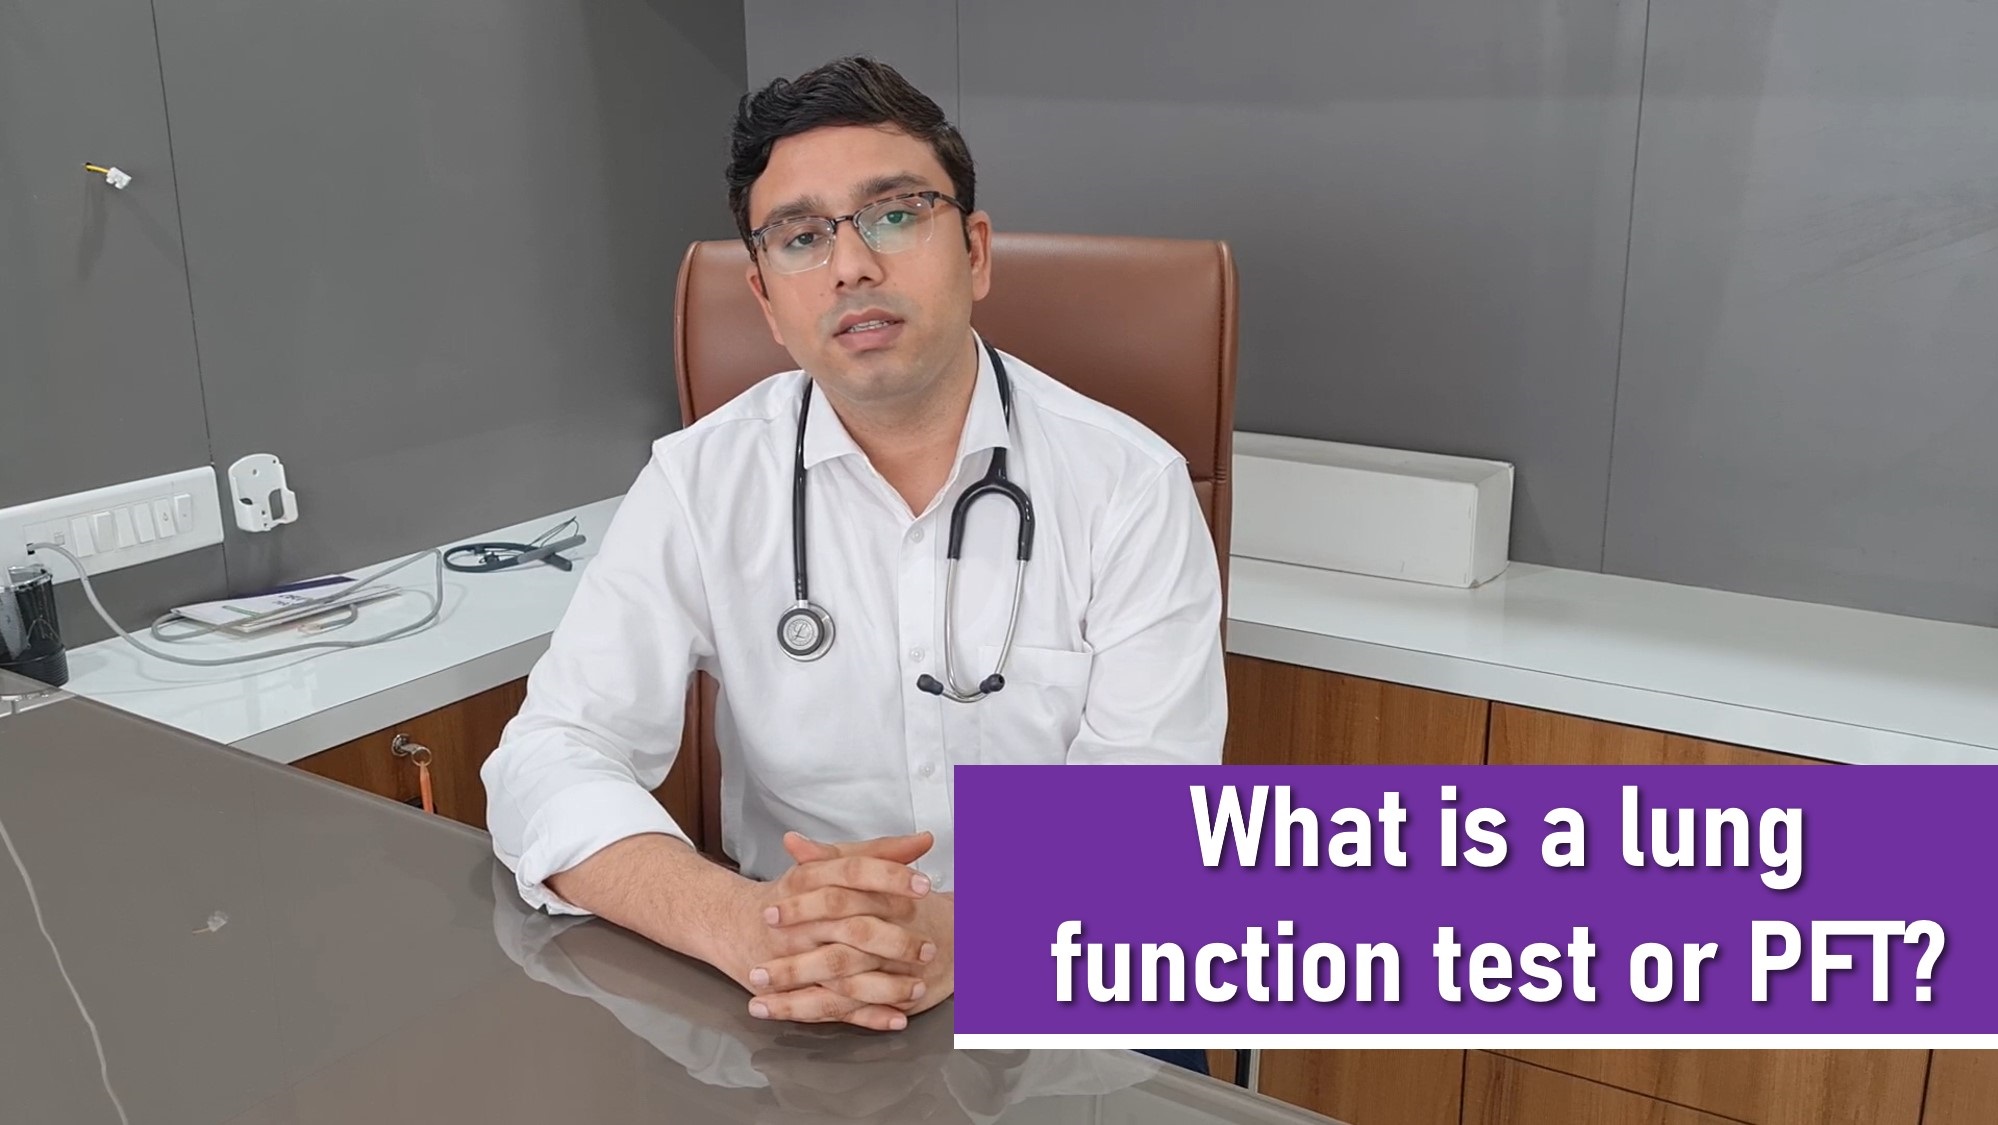 What is a lung function test or PFT?